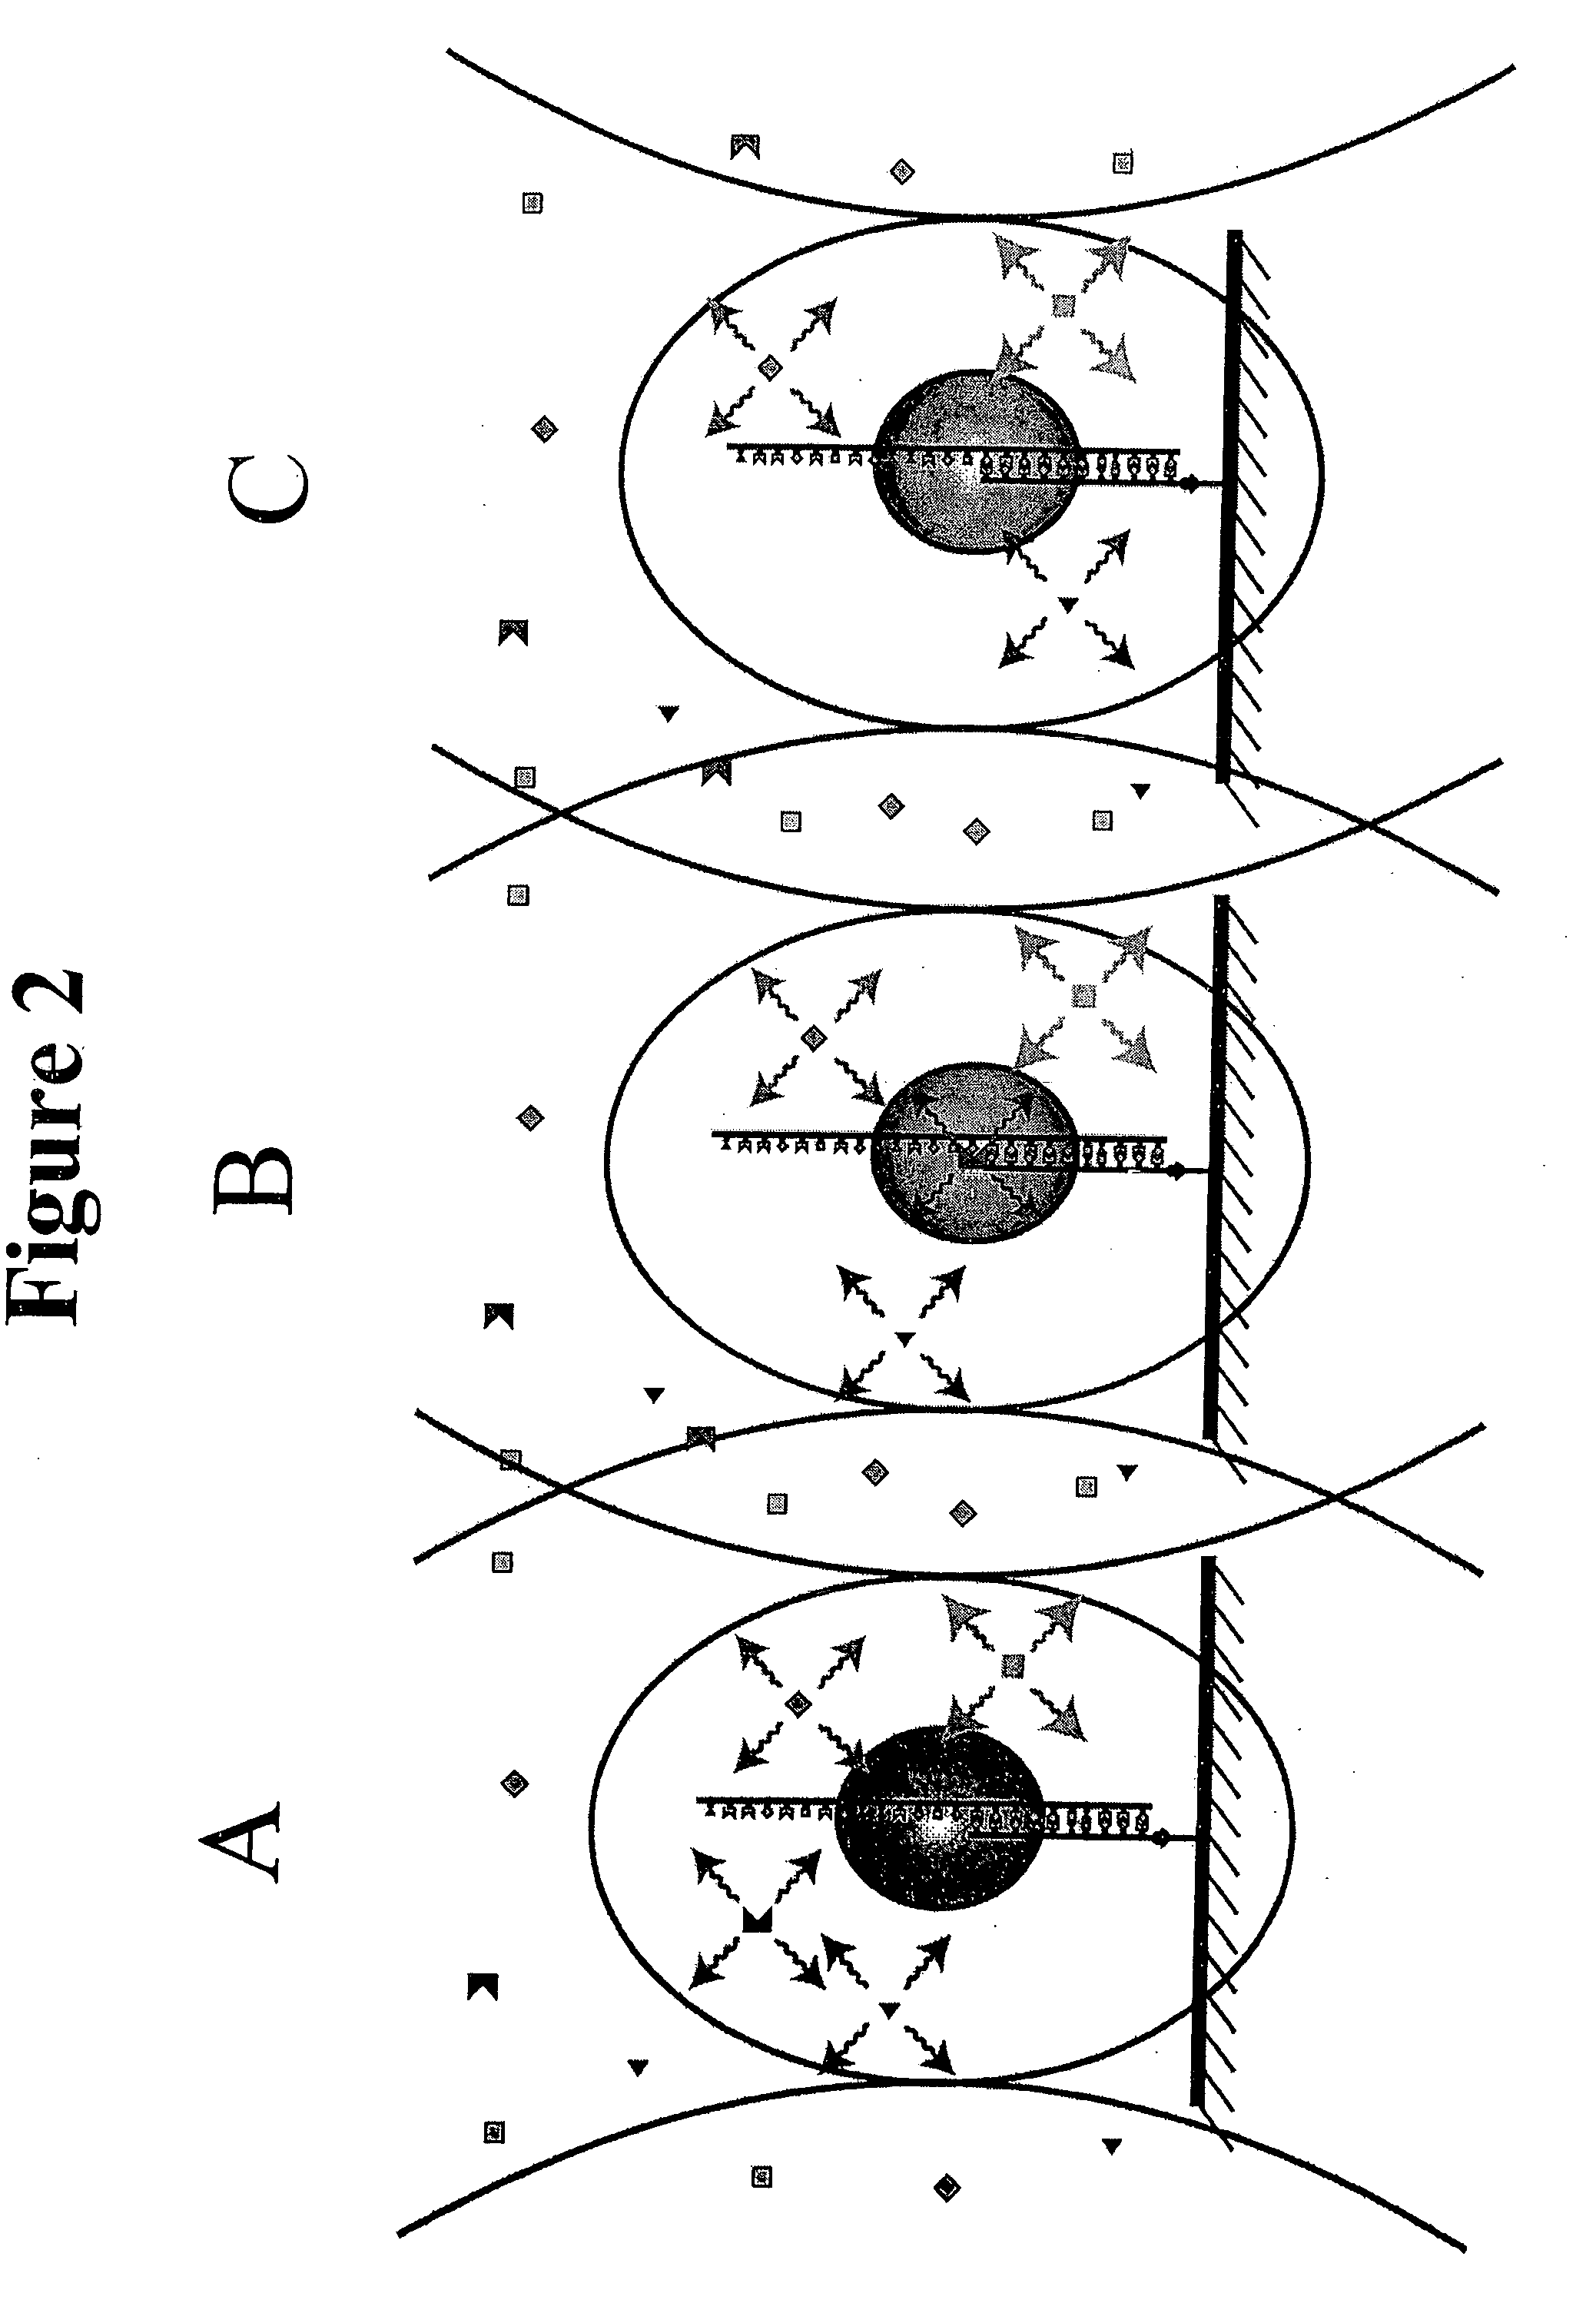 Method for sequencing nucleic acid molecules